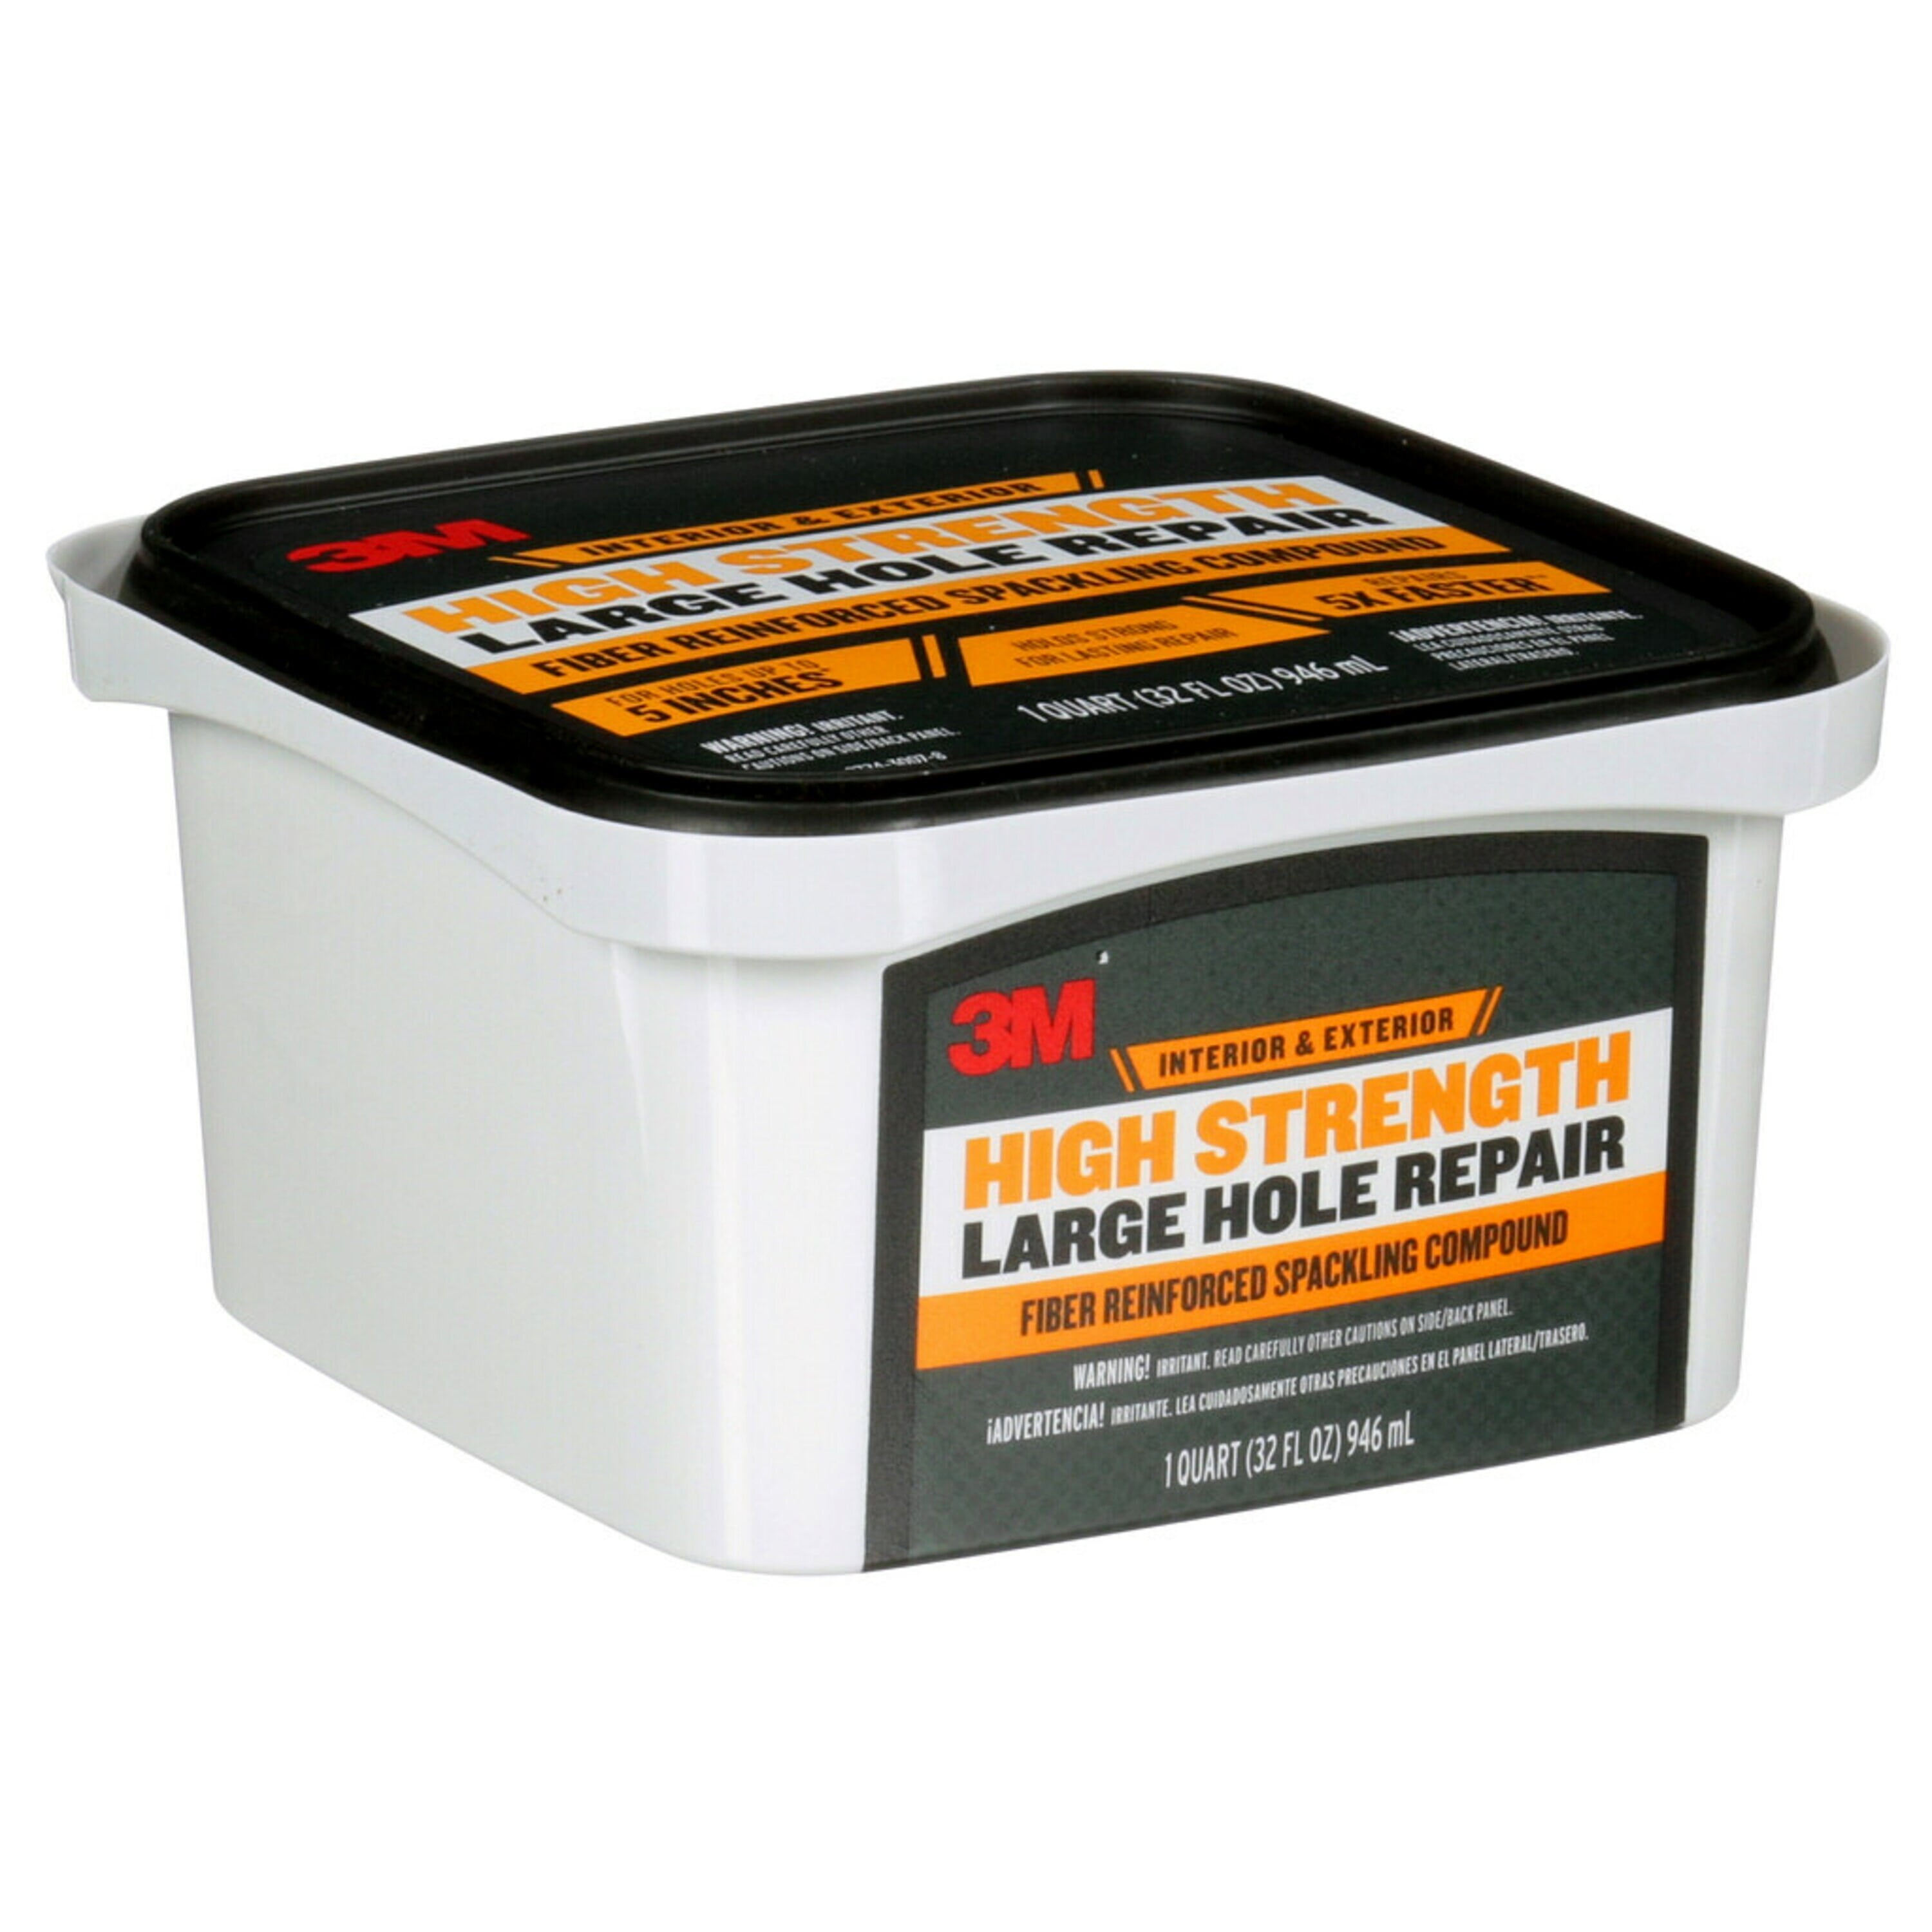 3M High 32 Interior Reinforced, Hole Use, Fiber Strength Exterior and Filler, Wall White, oz. Large